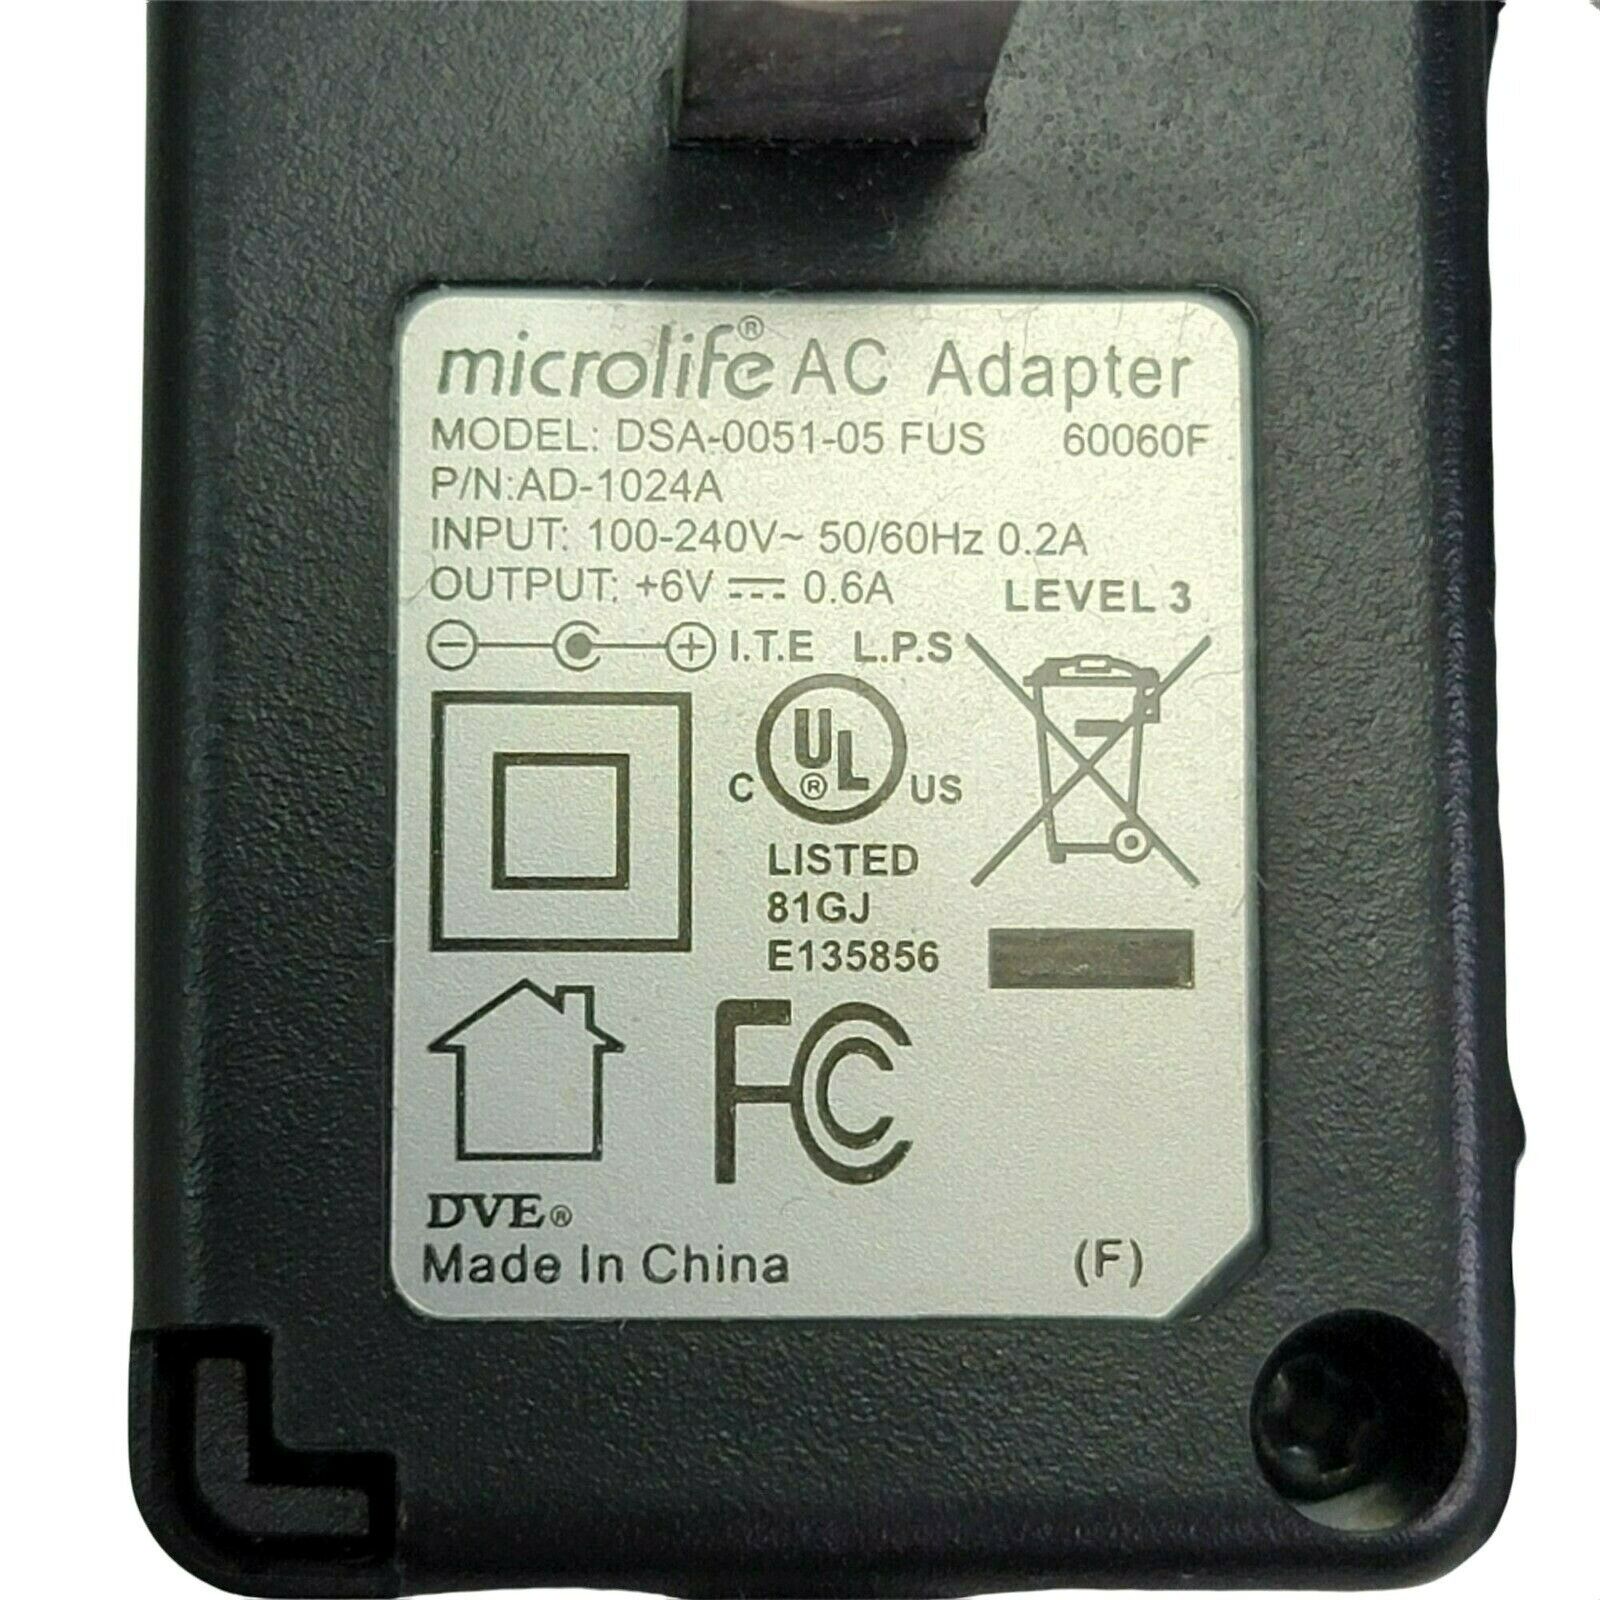 Microlife DVE DSA-0051-05 FUS AC Adapter 6.5V 0.65A Power Supply Charger Compatible Brand: MicroLife Type: Adapter C